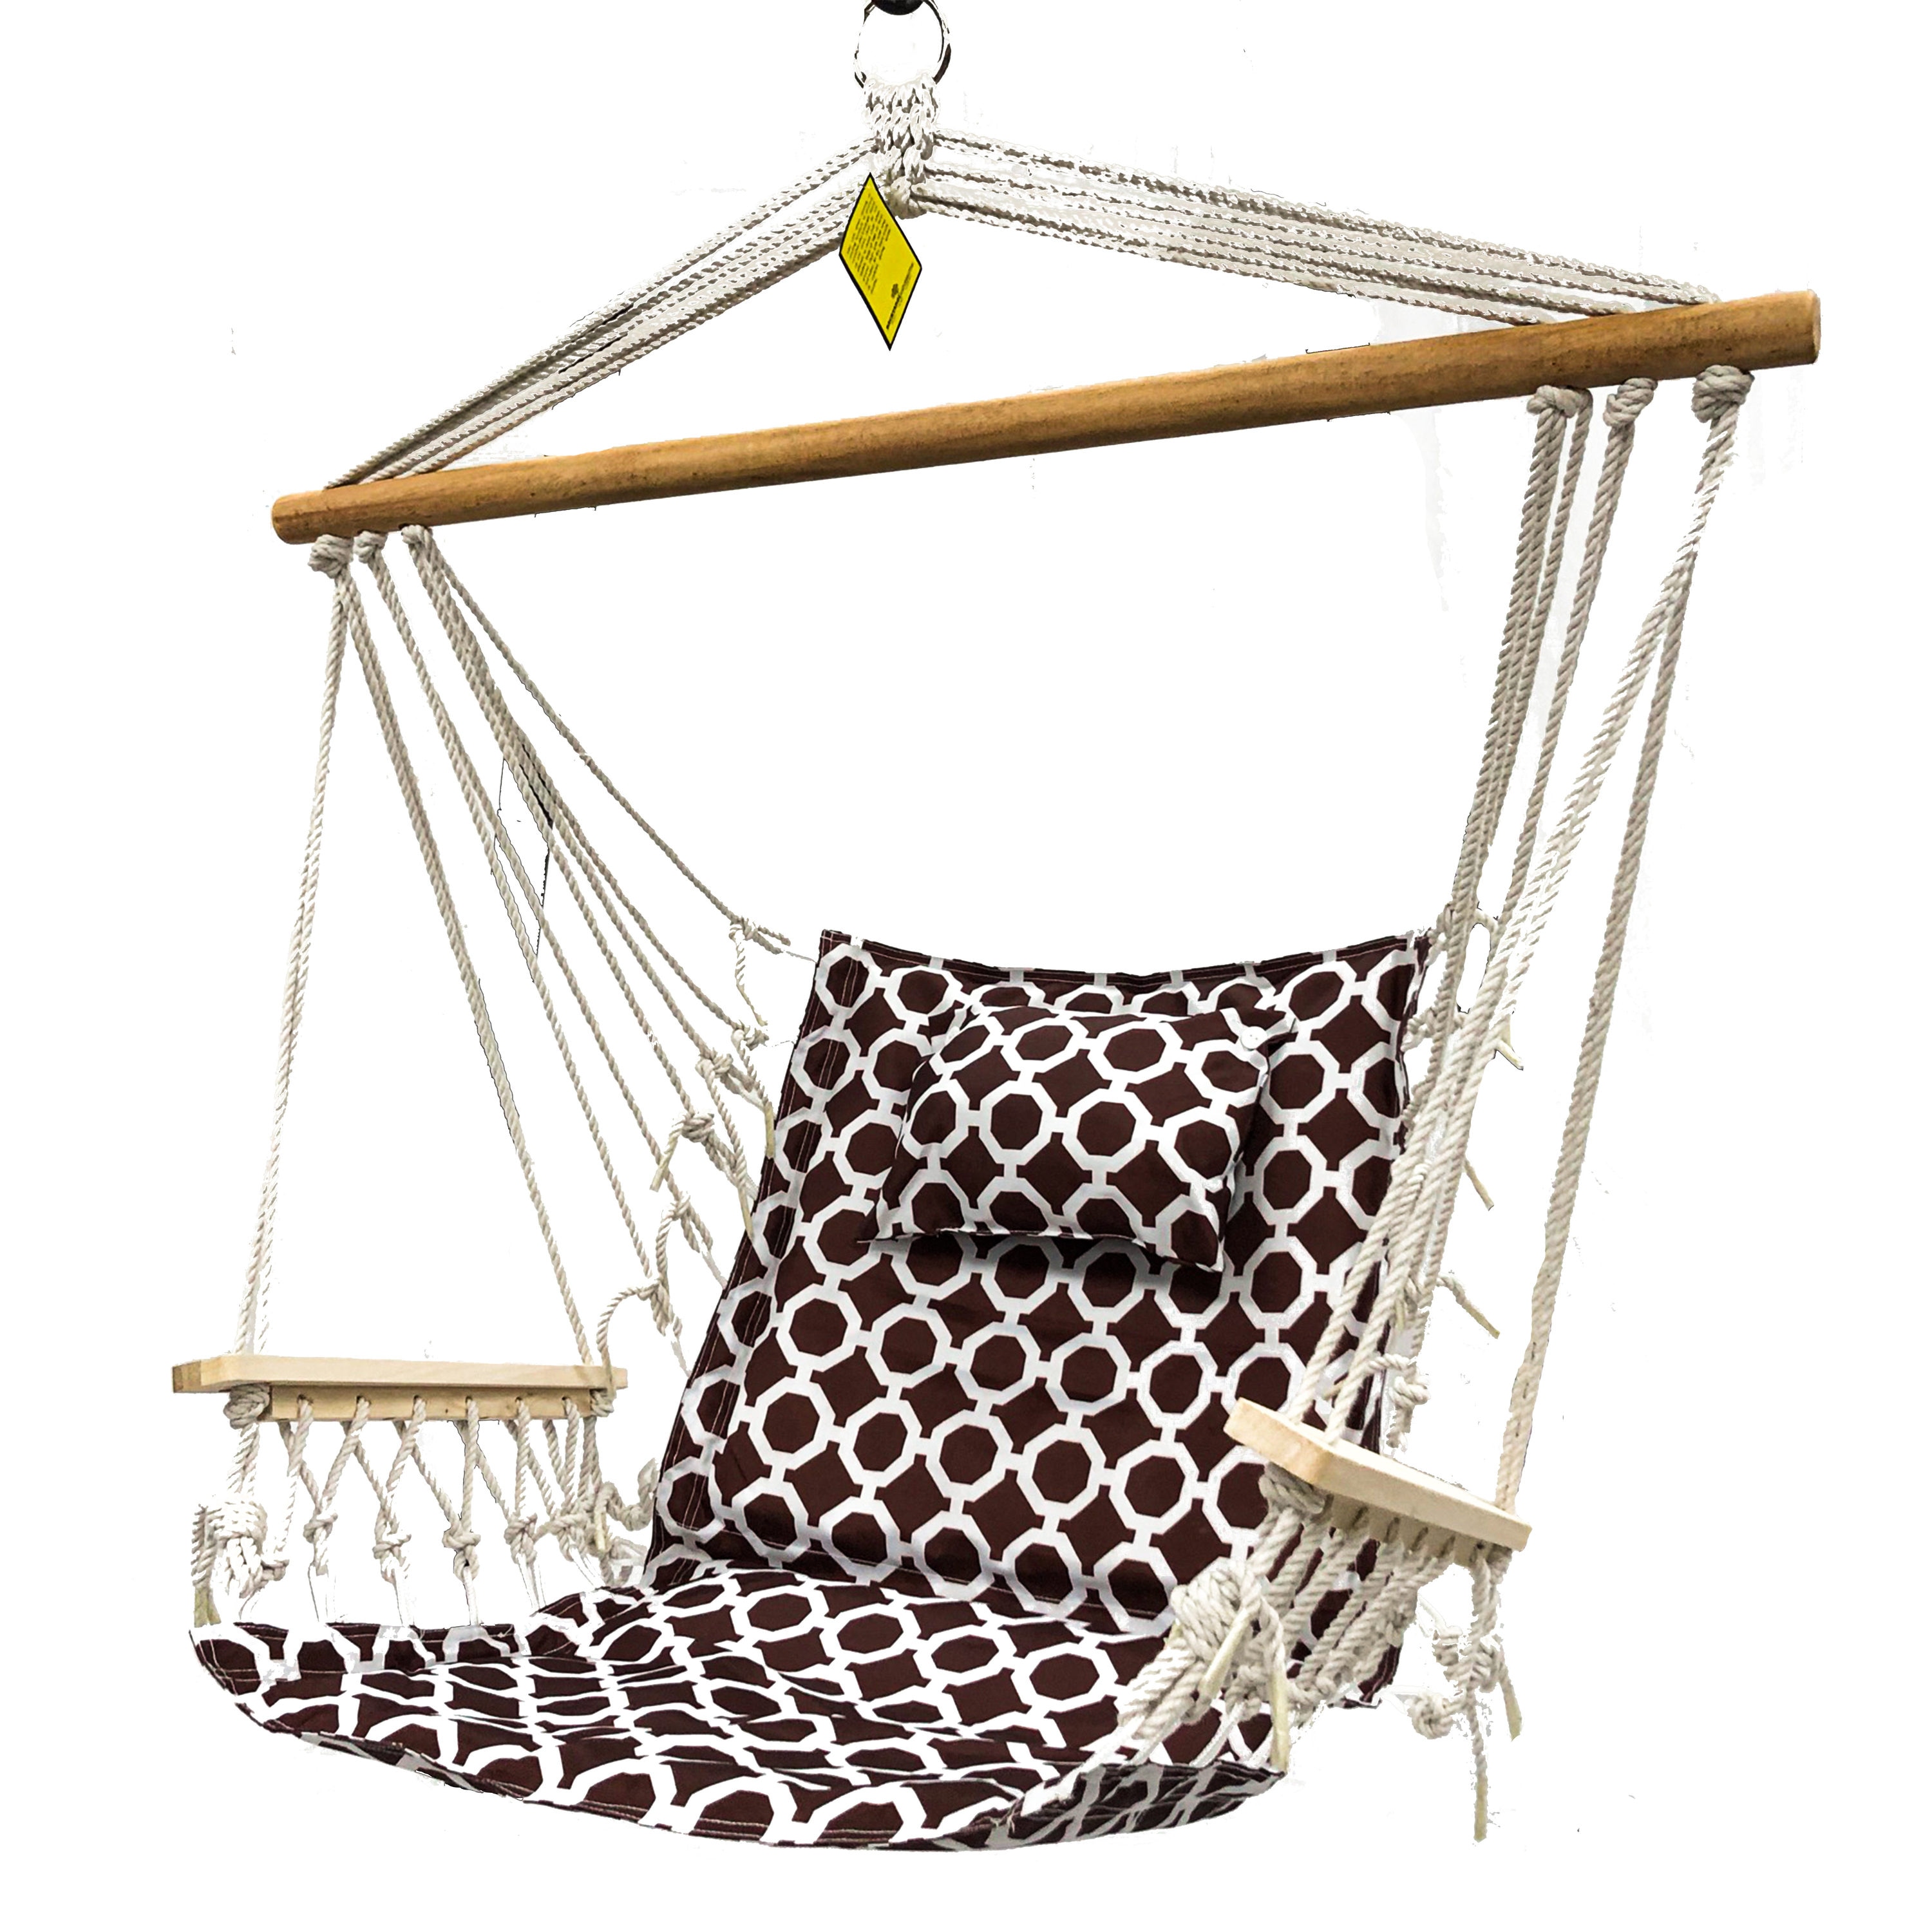 Fruit Stripes BACKYARD EXPRESSIONS PATIO · HOME · GARDEN 913774 Hammock Hanging Provides The Ultimate Comfort and Chair Appeals to All Ages 